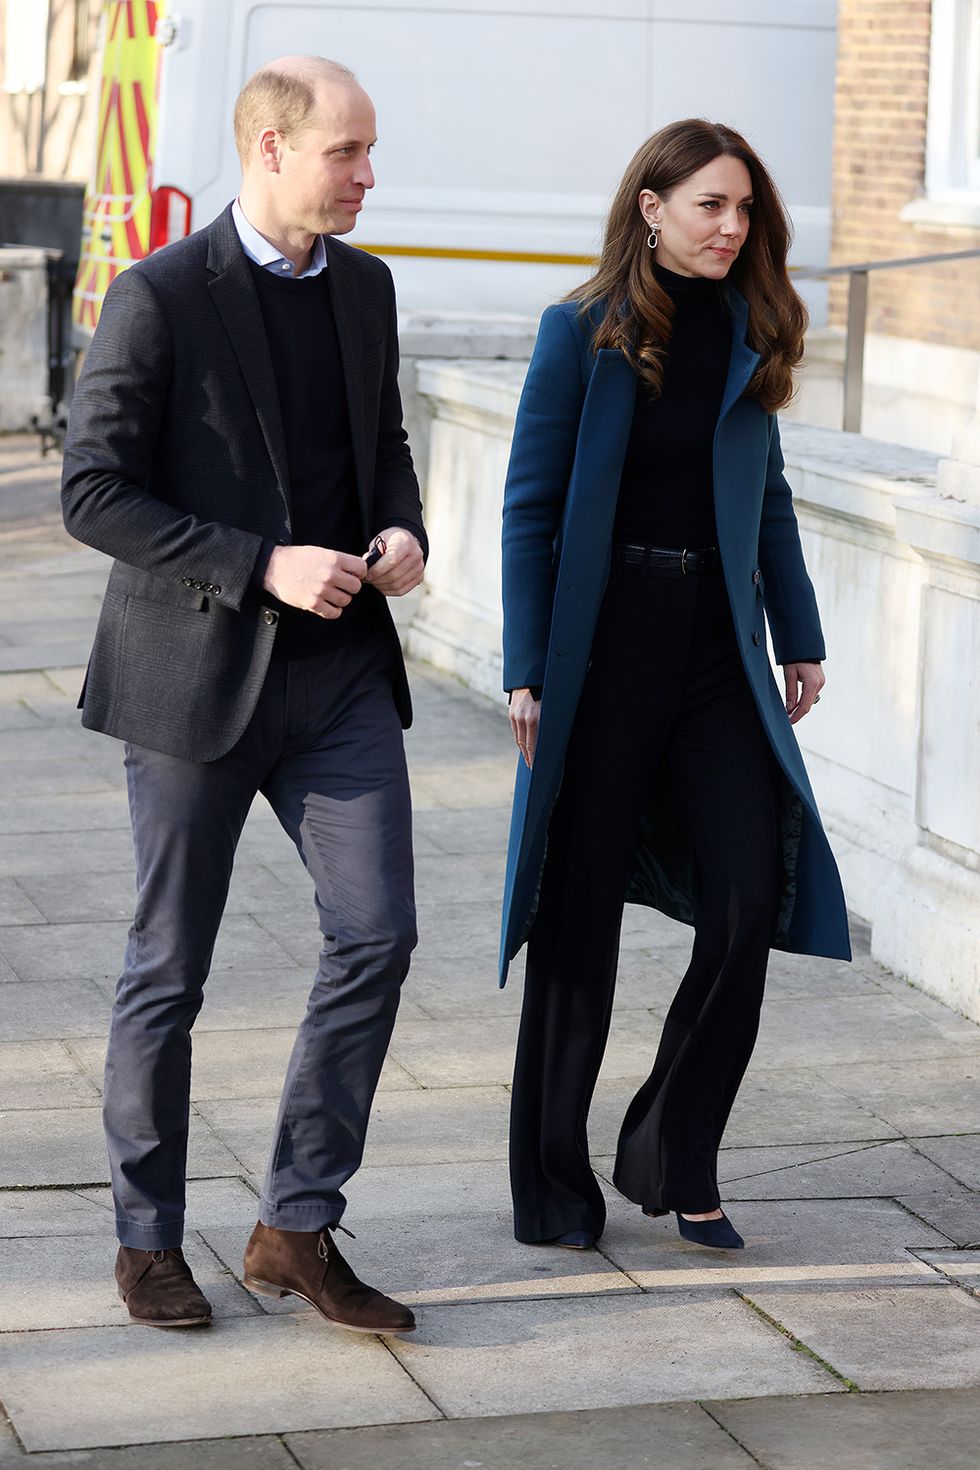 Kate Middleton wears blue coat to Foundling Museum